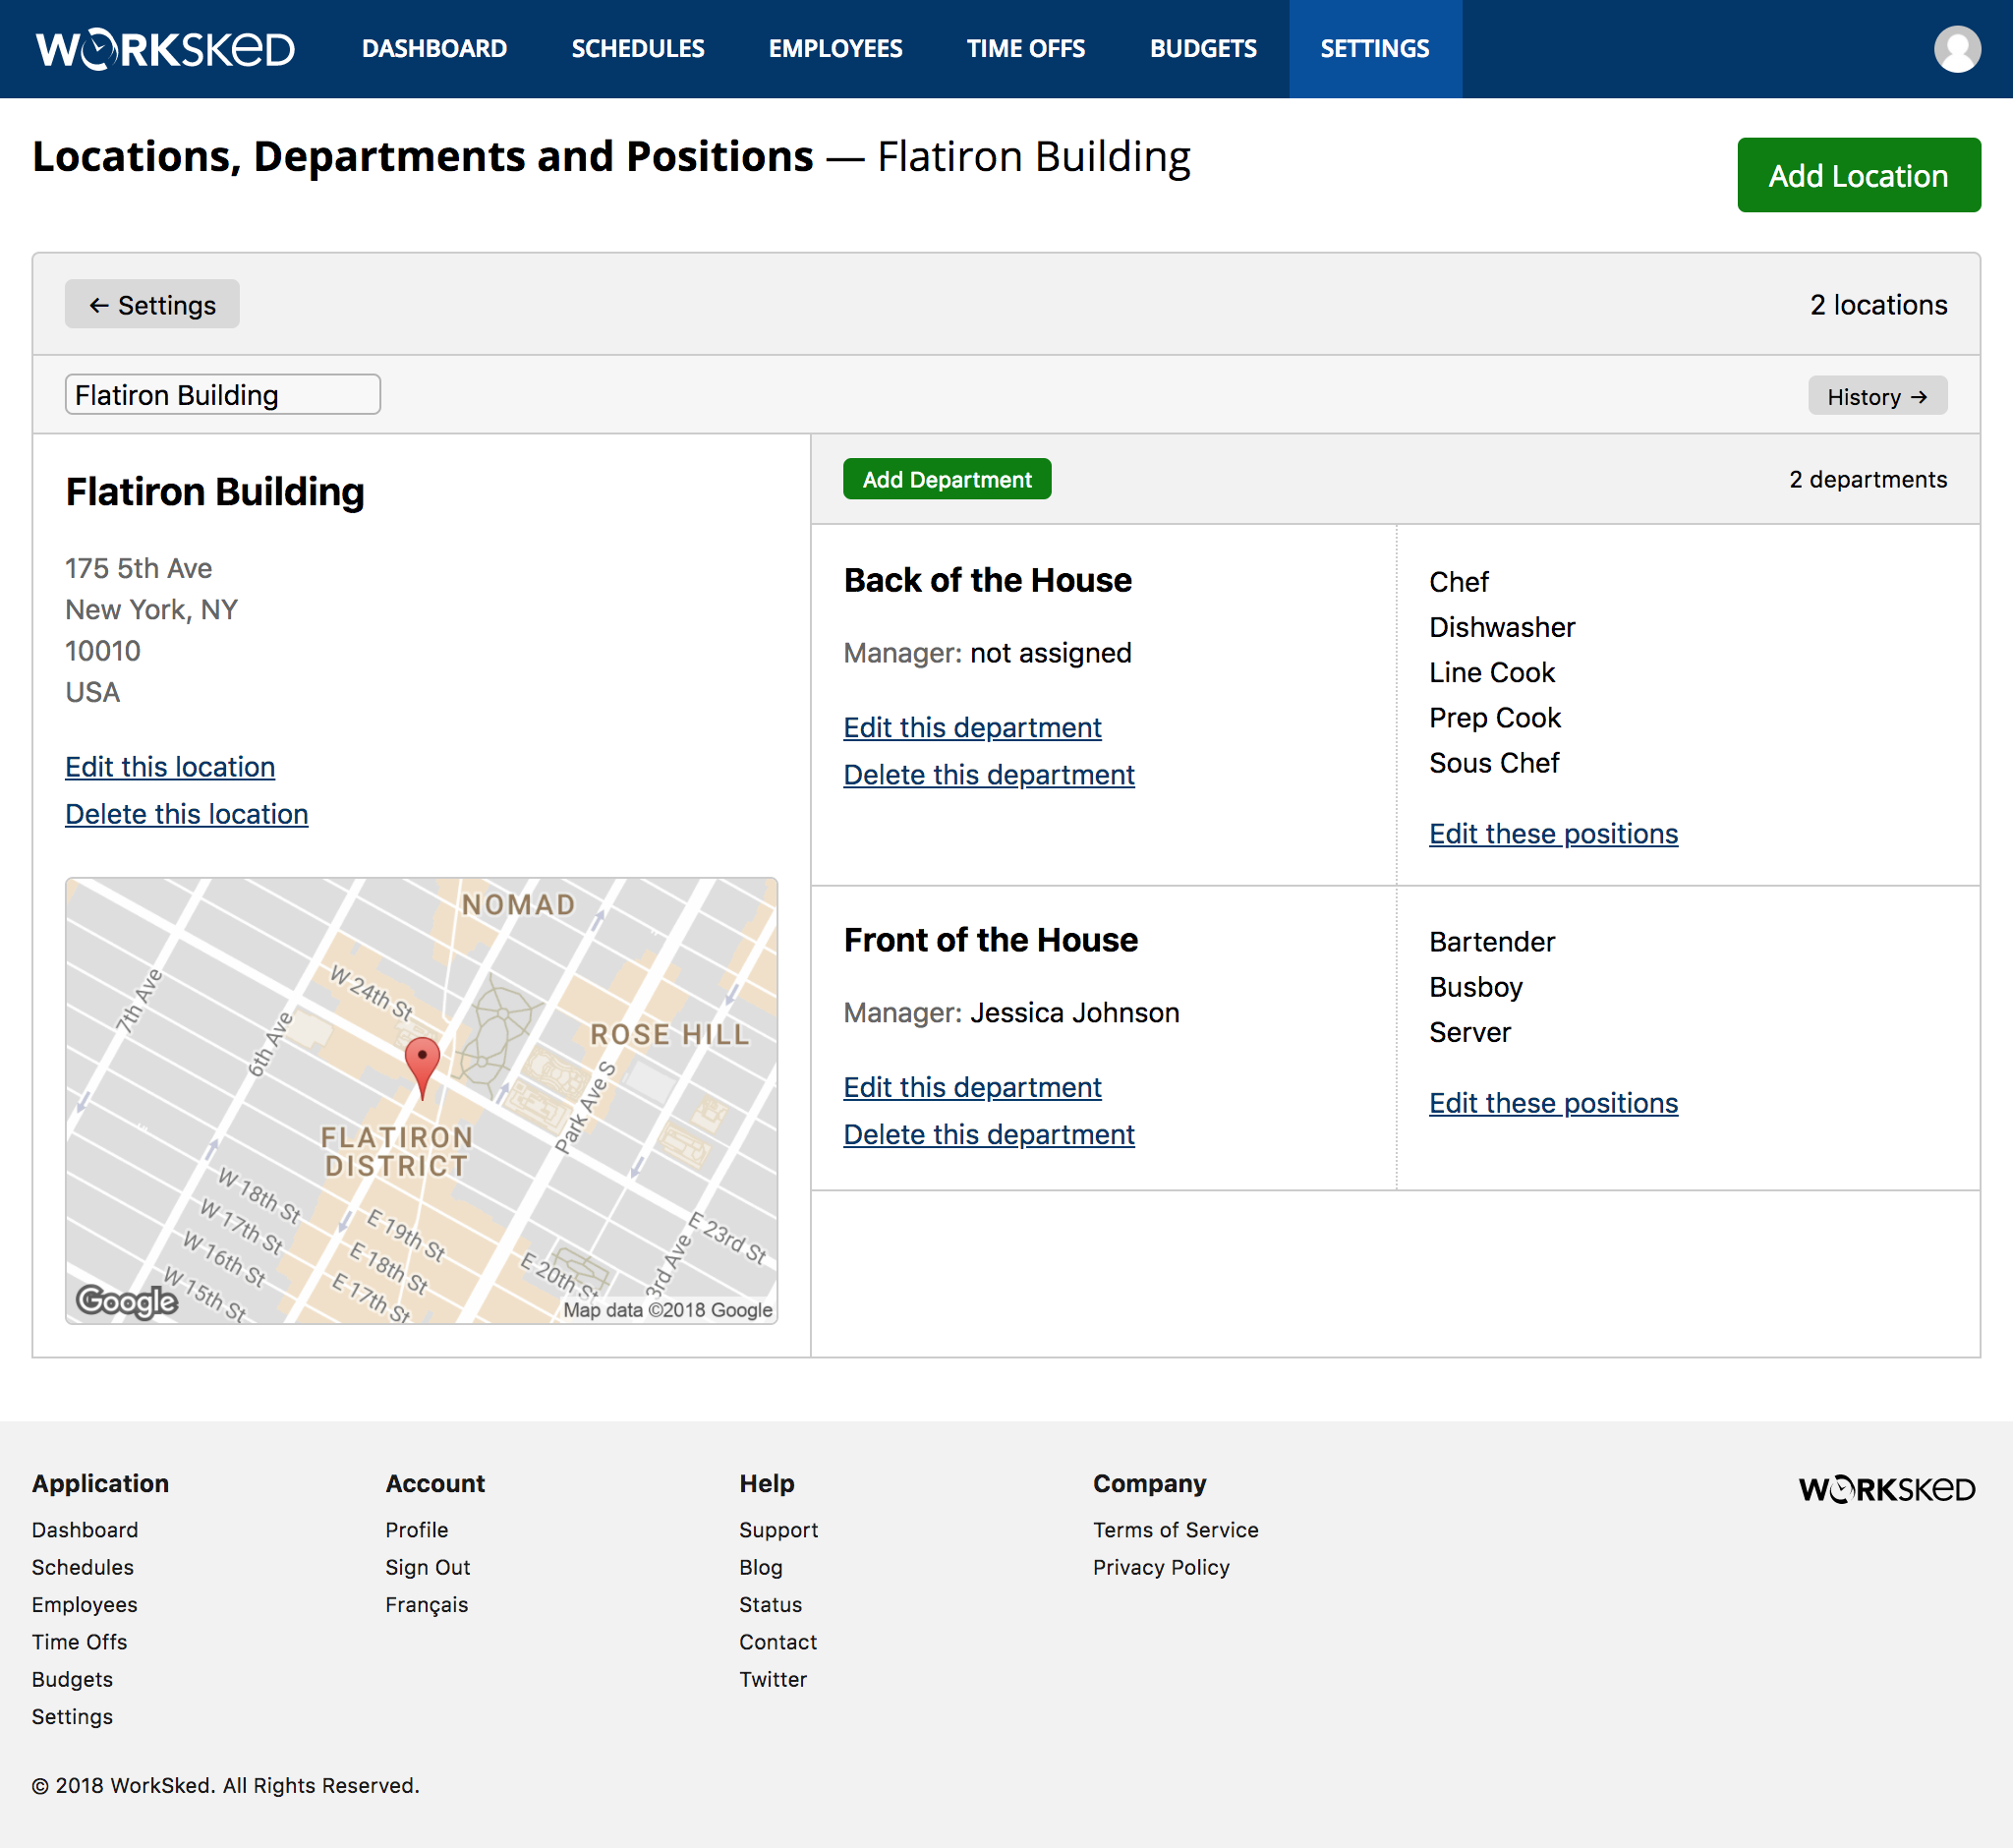 Sample screenshot for Locations, Departments, and Positions